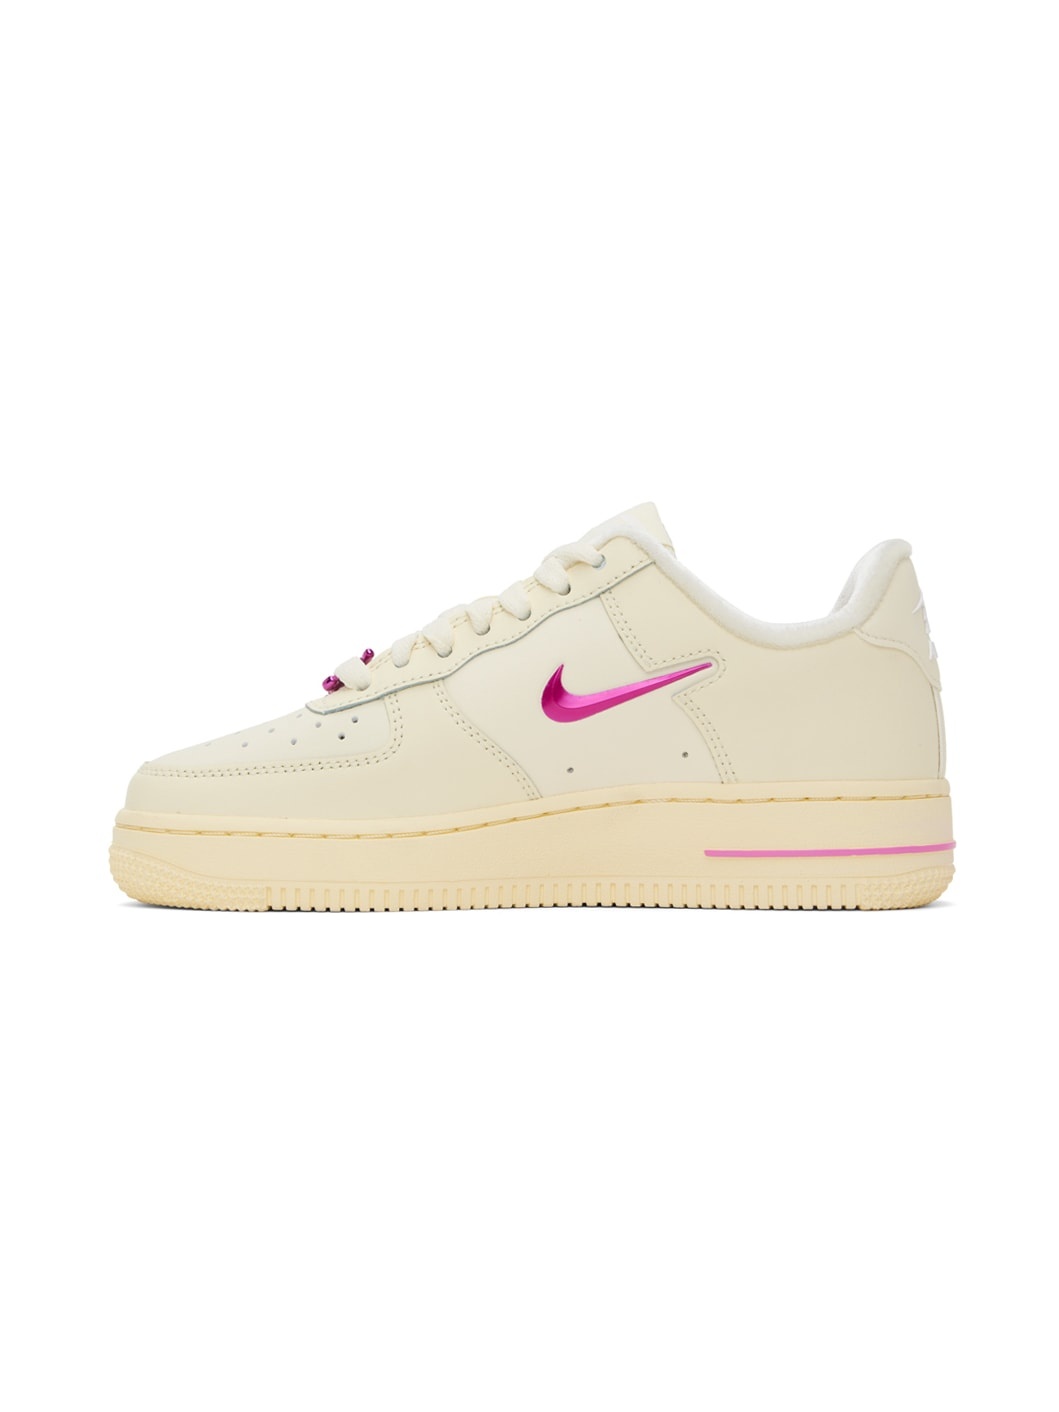 Off-White Air Force 1 '07 Sneakers - 3